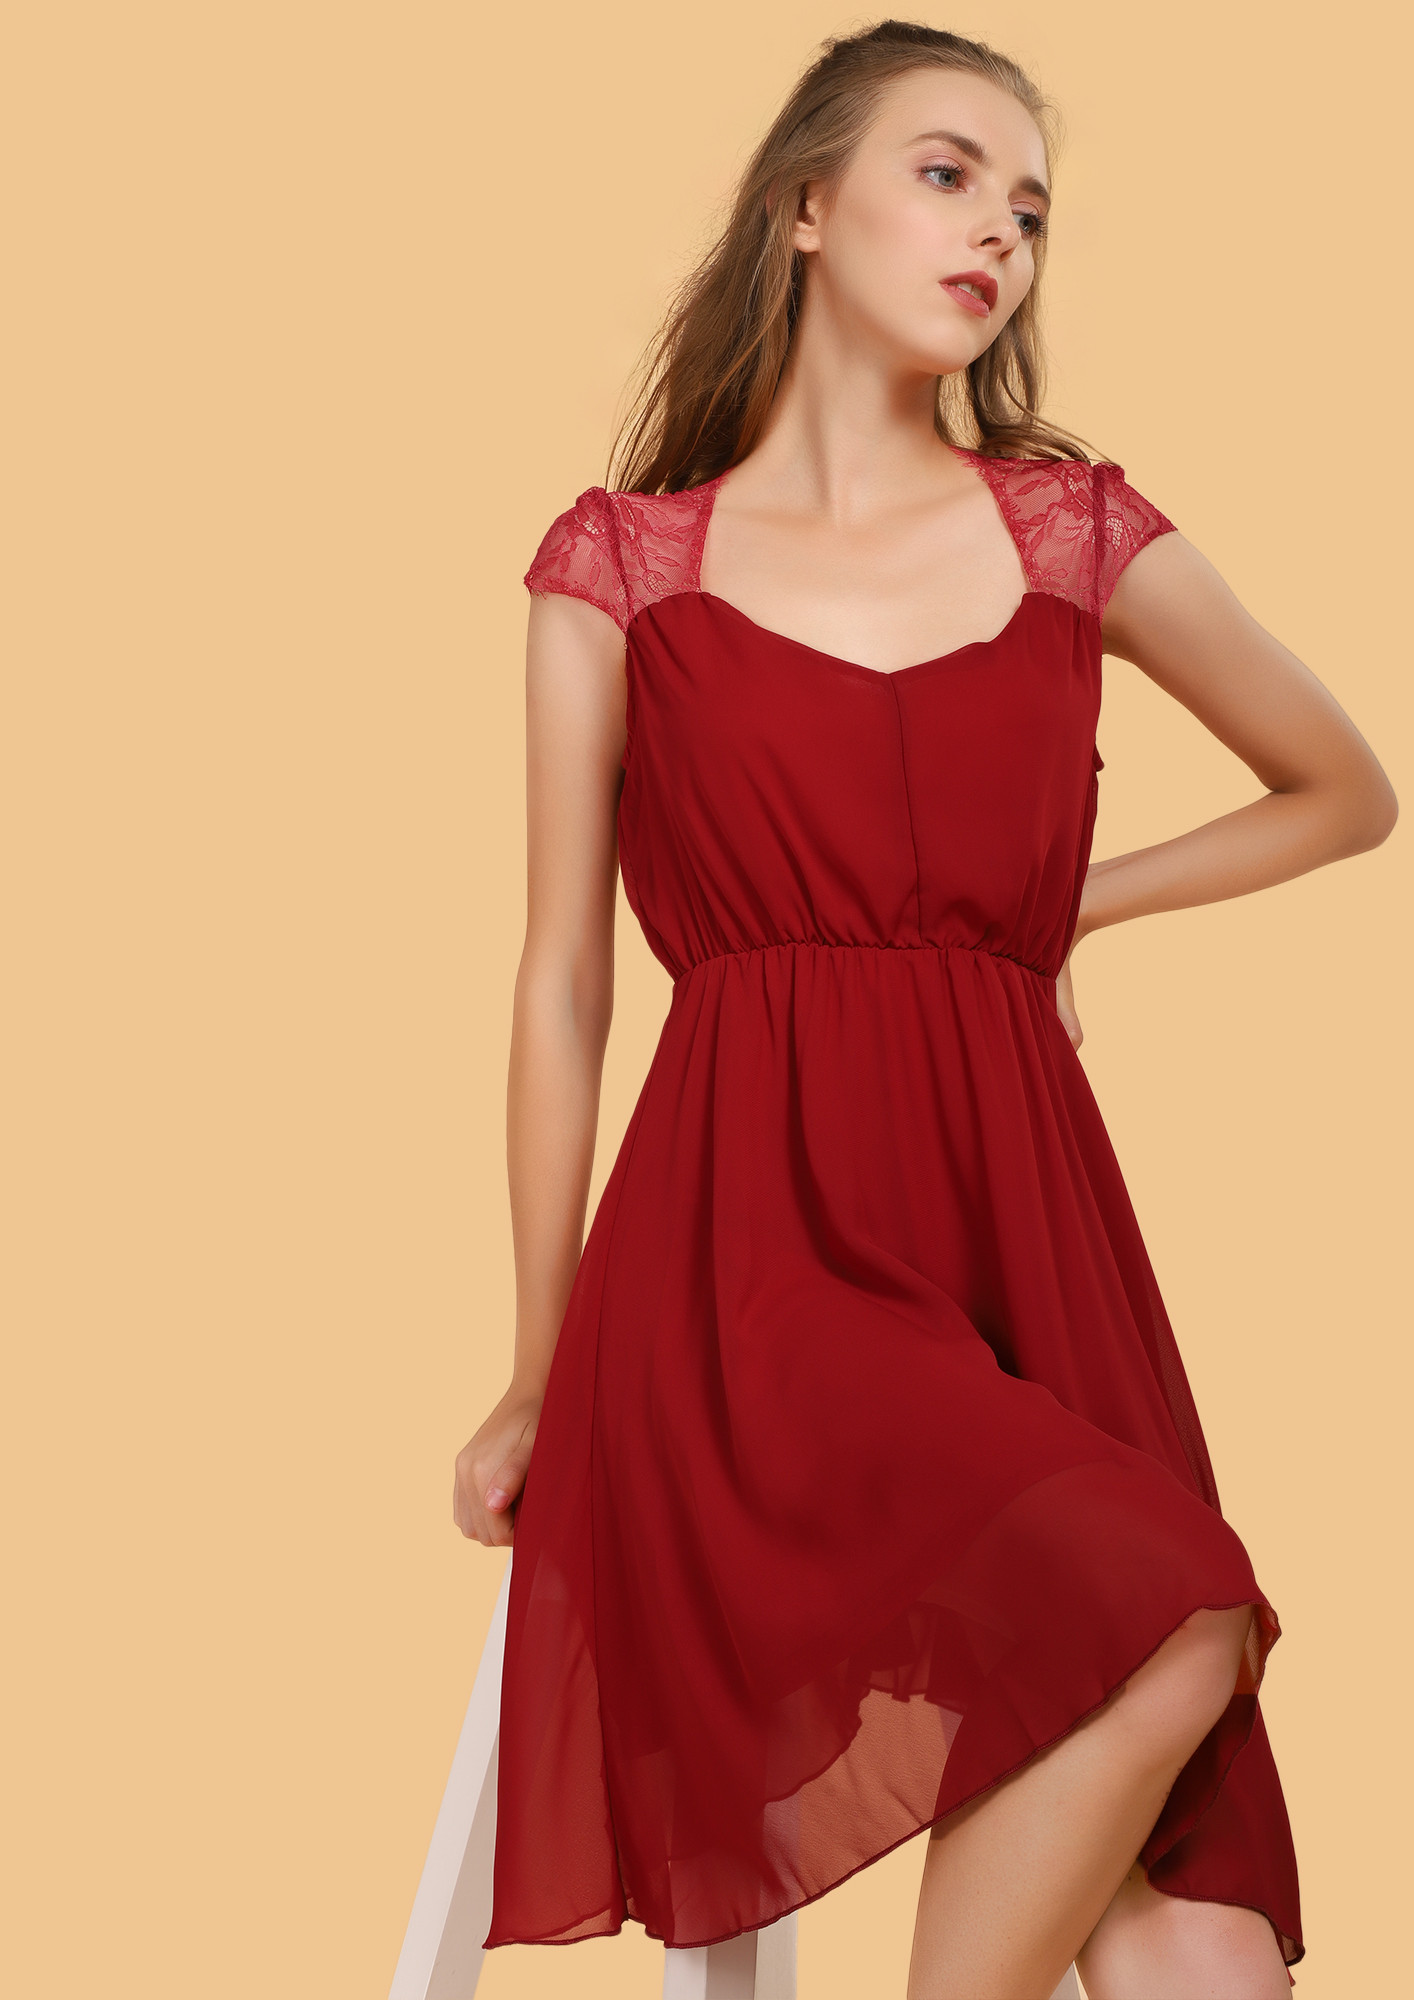 PERFECTLY MESHED MAROON SKATER DRESS